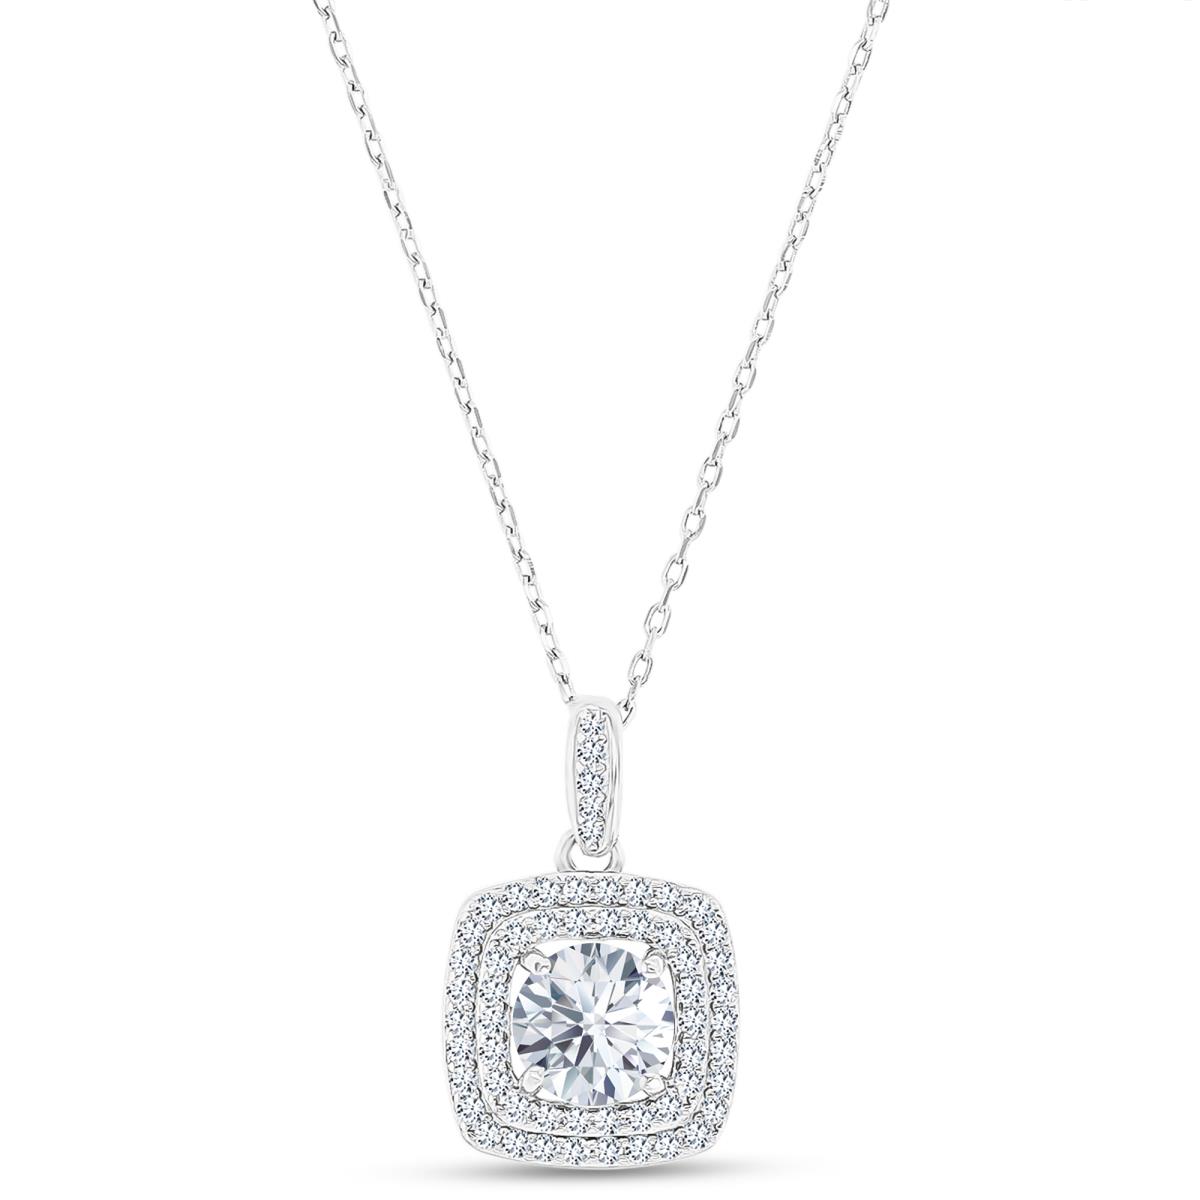 Sterling Silver Rhodium 7mm RD White Topaz/ Cr White Sapphire Cushion Double Halo 16"+2" Necklace